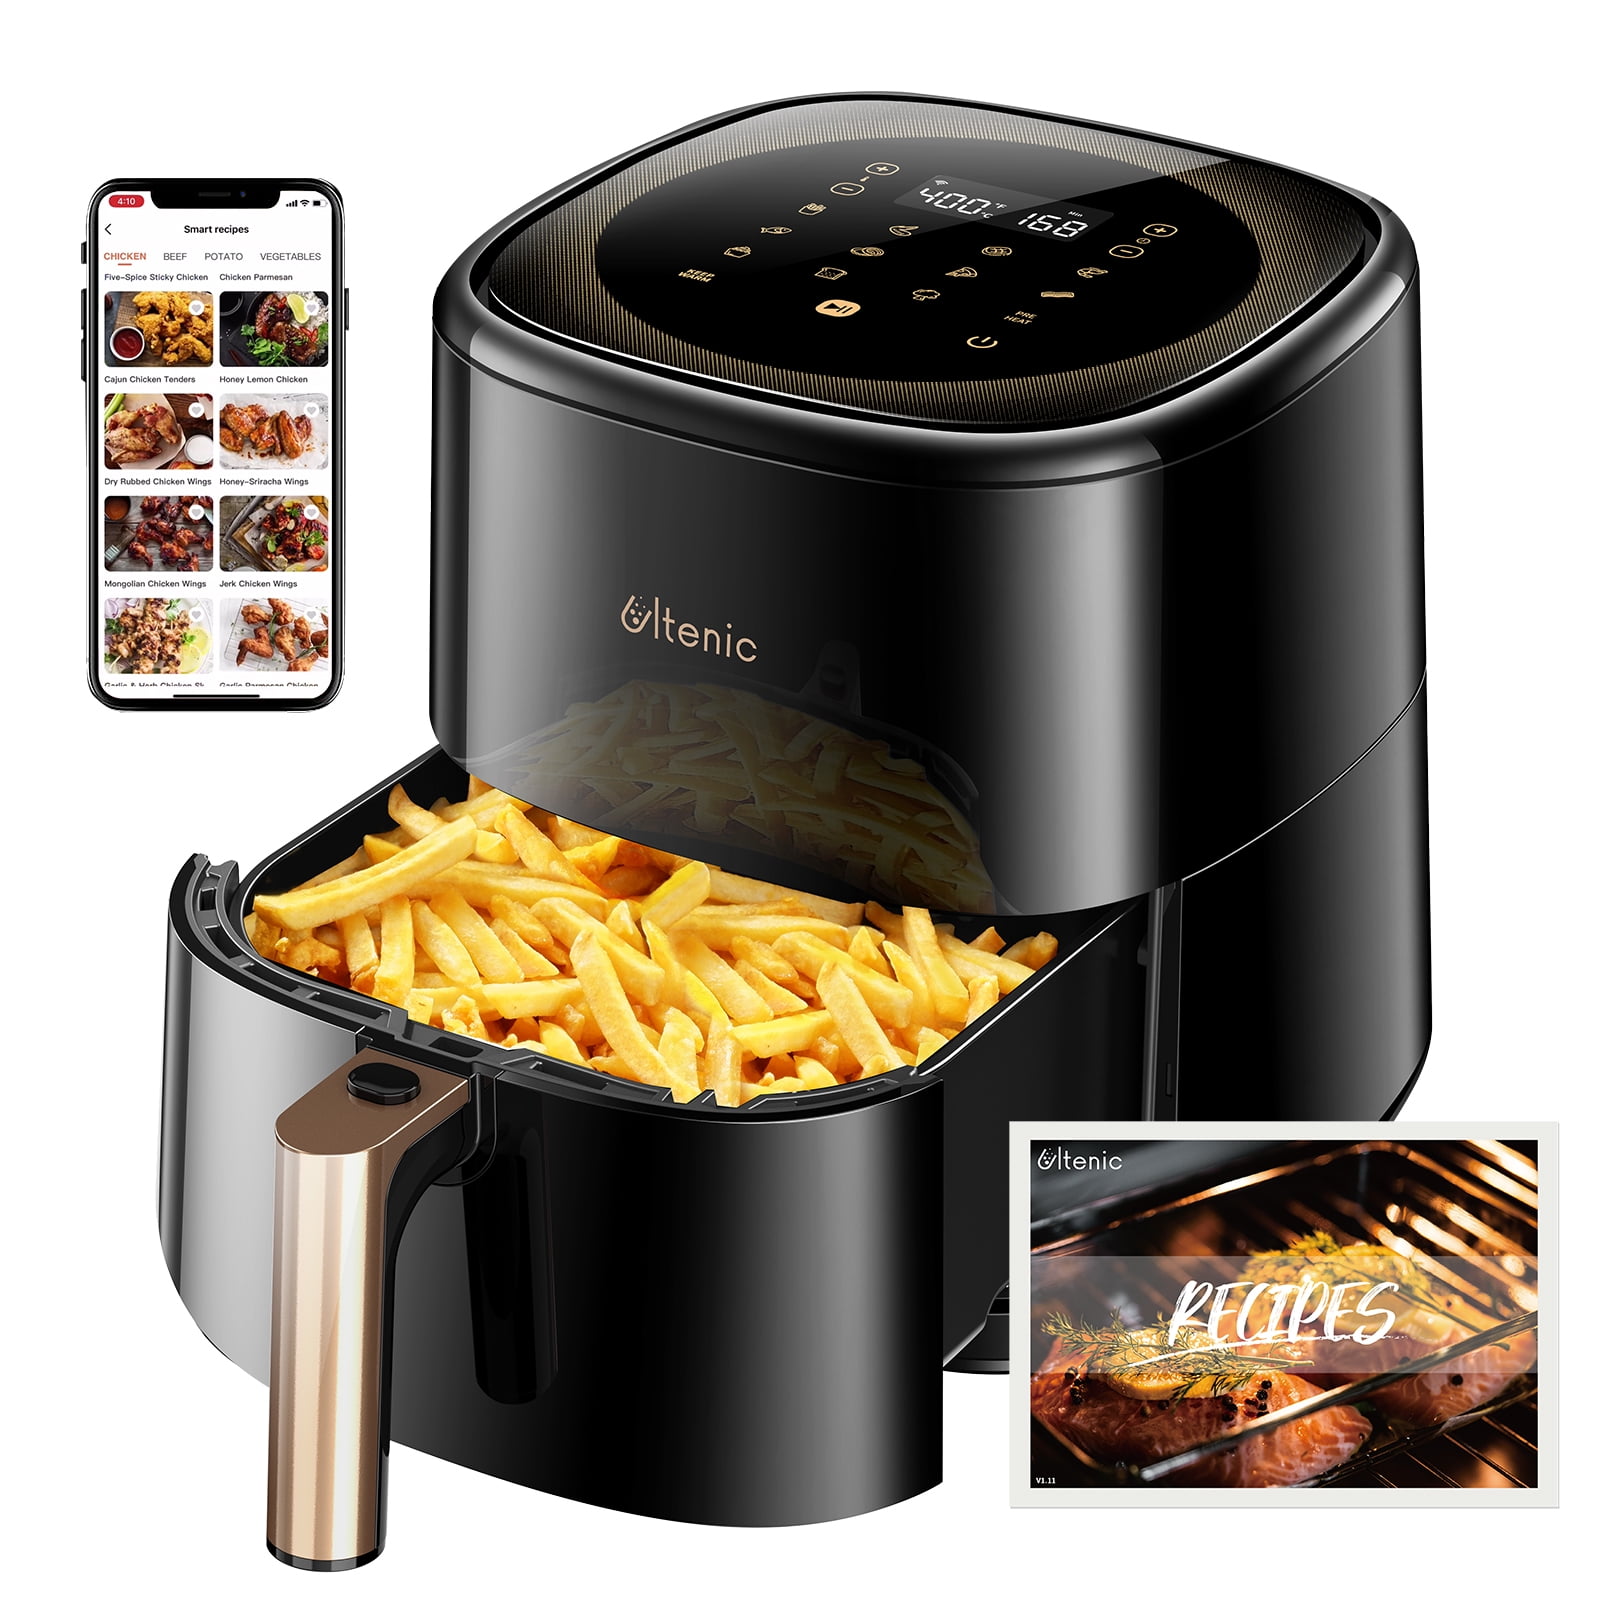 🥰 Smart Appliances & Best Kitchen Gadgets For Every Home #23